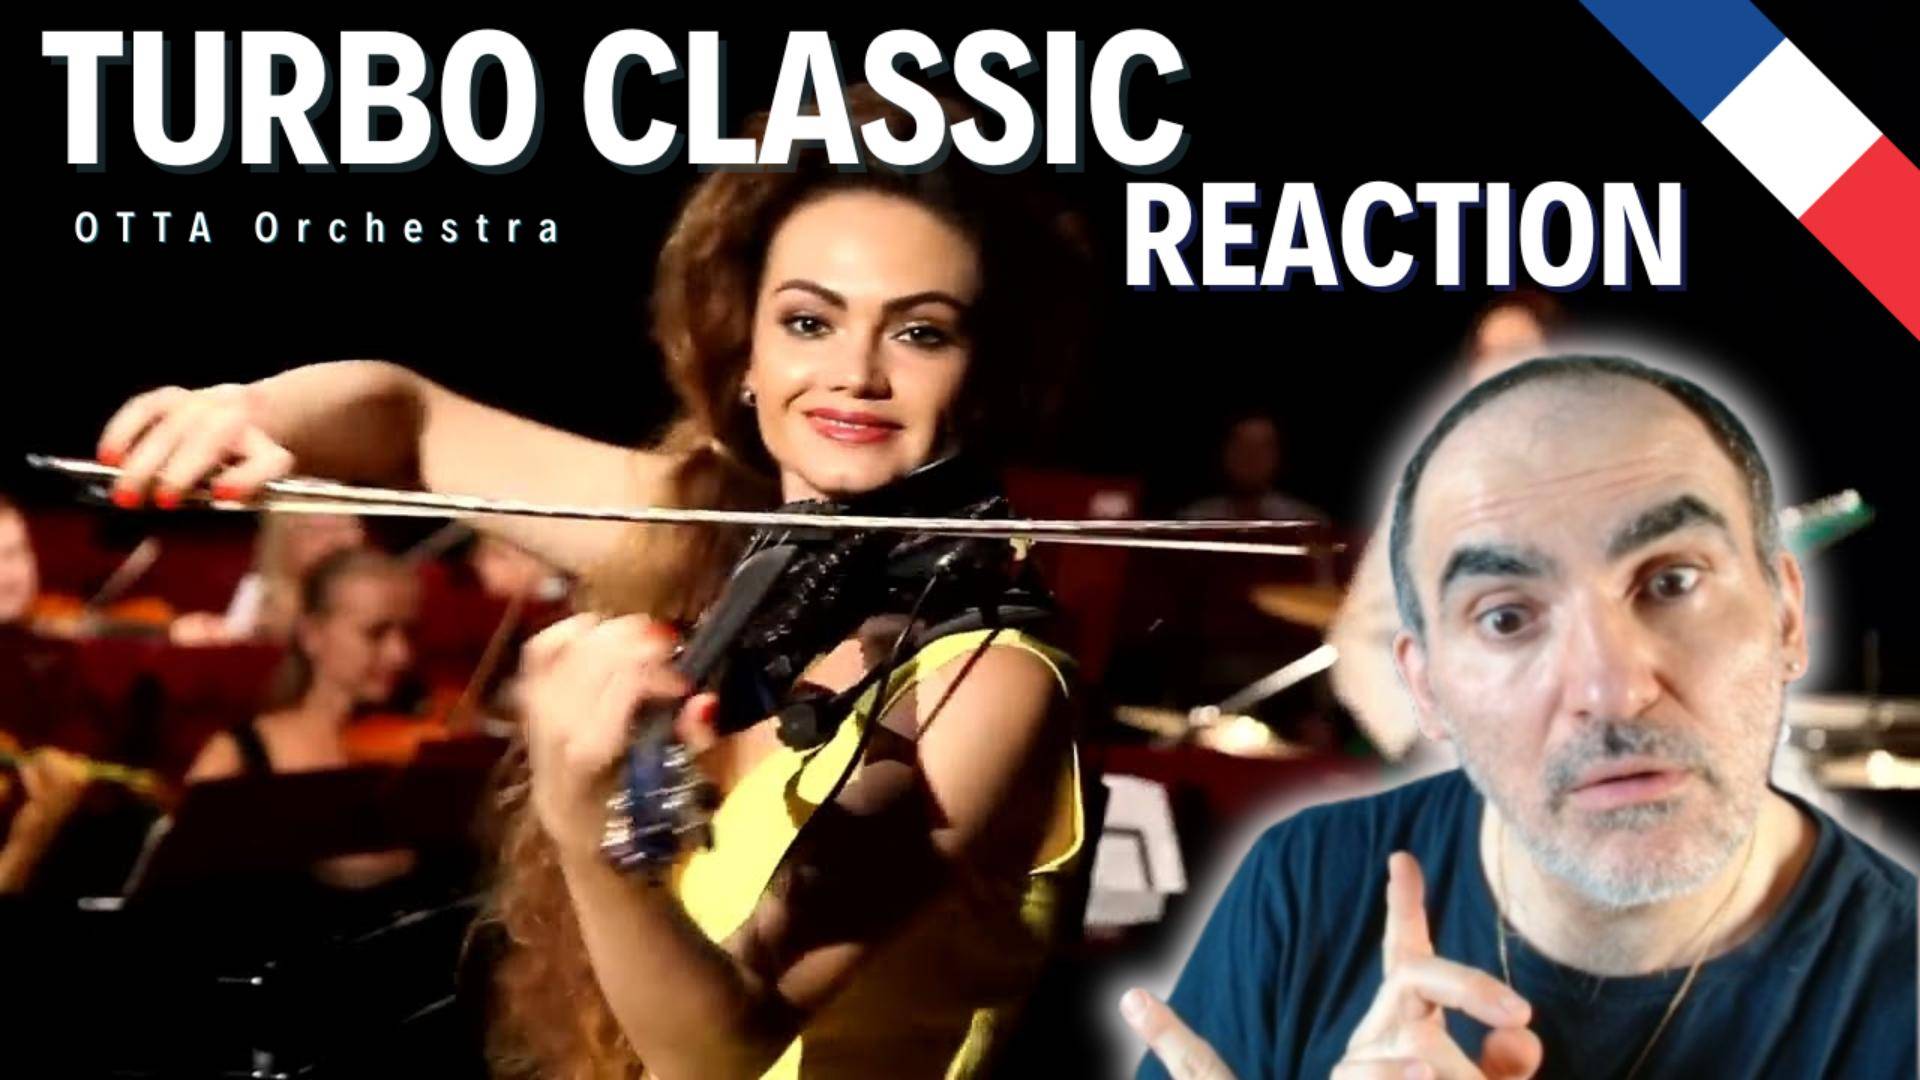 OTTA Orchestra & Academic Symphony Orchestra of the Crimean - "TURBO CLASSIC" ║ Réaction Française !